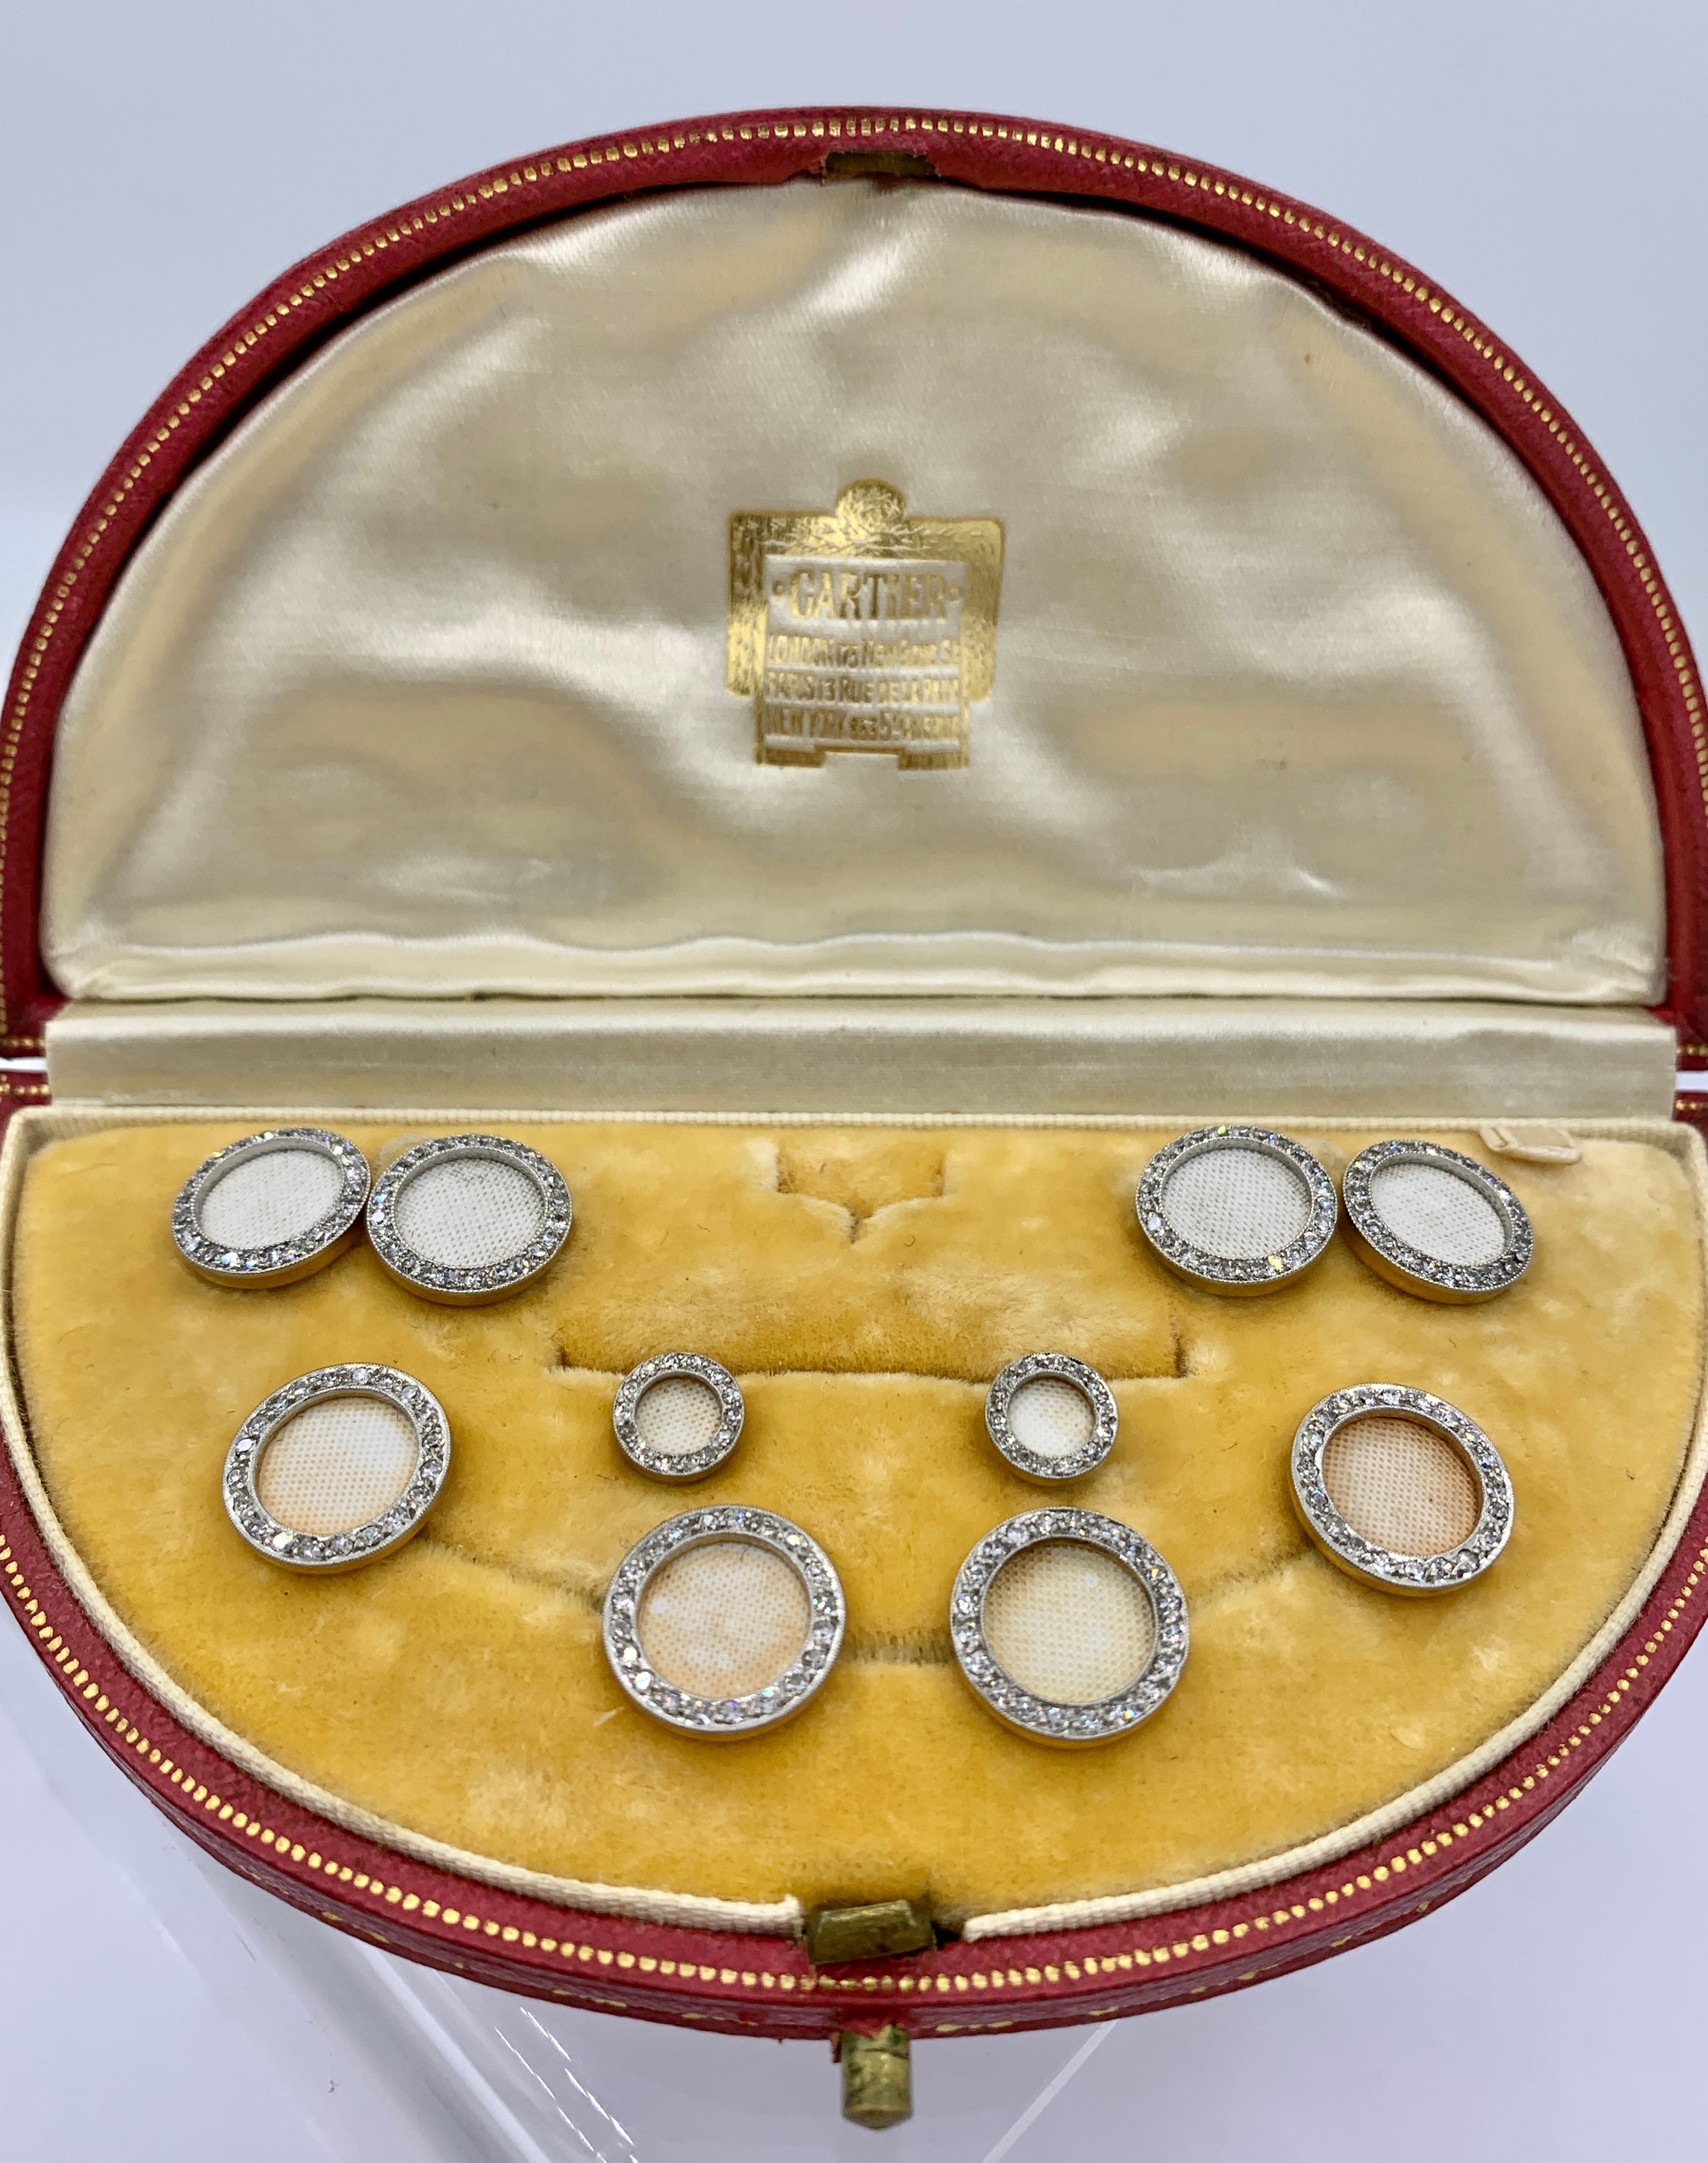 This is an extraordinary museum quality Cartier French Diamond and Enamel Dress Set with Cuff Links, Studs and Buttons in Platinum and 18 Karat Gold and dating to the Art Deco period, Circa 1910, and in the original Cartier Art Deco velvet and silk